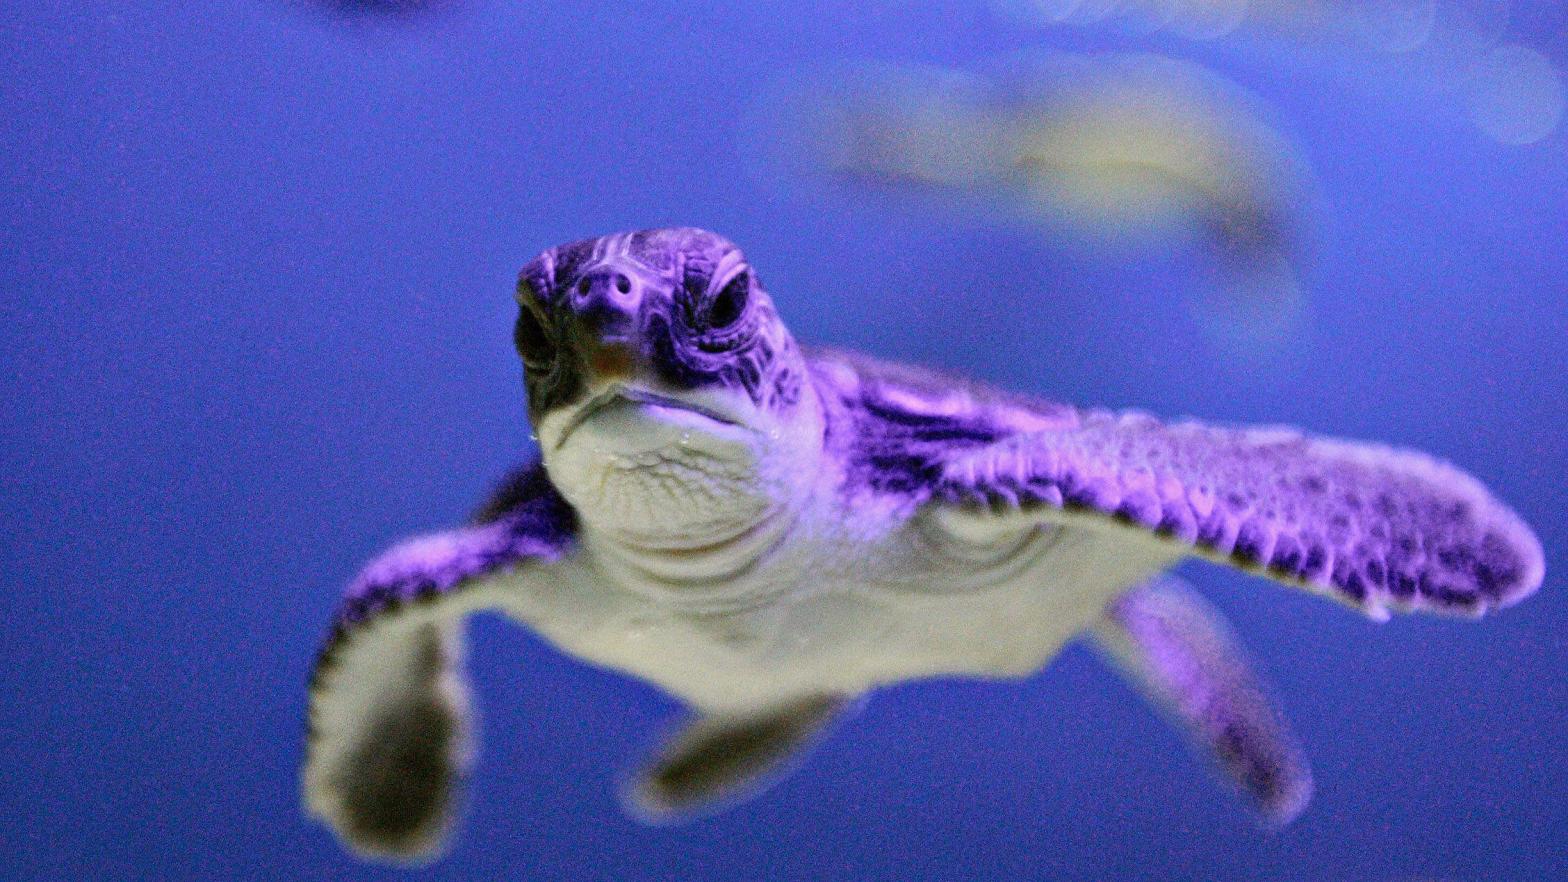 A green sea turtle hatchling swimming in a tank at the turtle conservancy section of Aquaria KLCC in Kuala Lumpur, Malaysia. (Photo: Tengku Bahar, Getty Images)